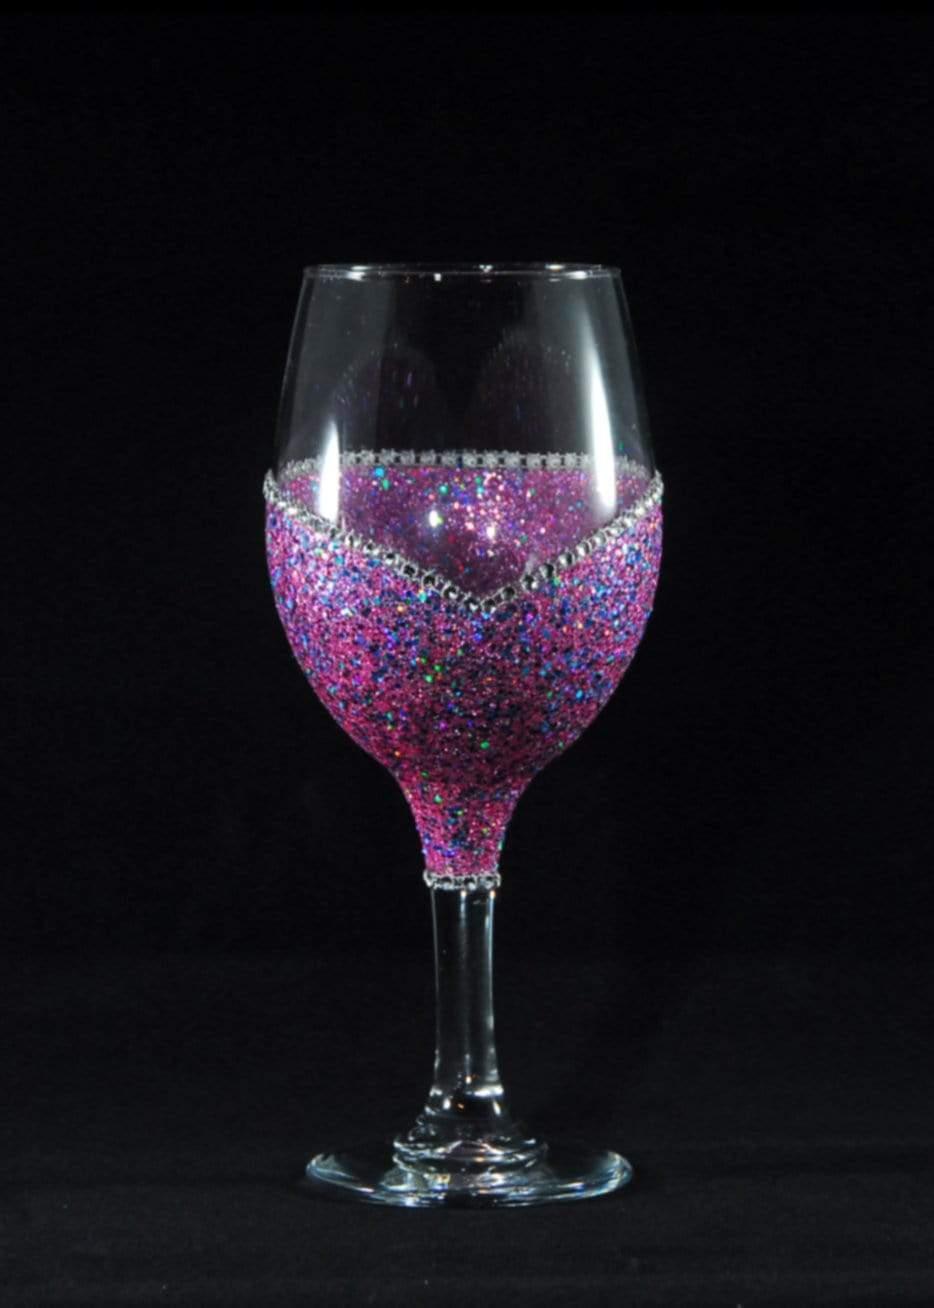 Floral Skull Design #4-Bling Stem or Stemless Wine Glasses-Choose your color-Pirate Theme - Winey Bitches - Wine- Women- K9's